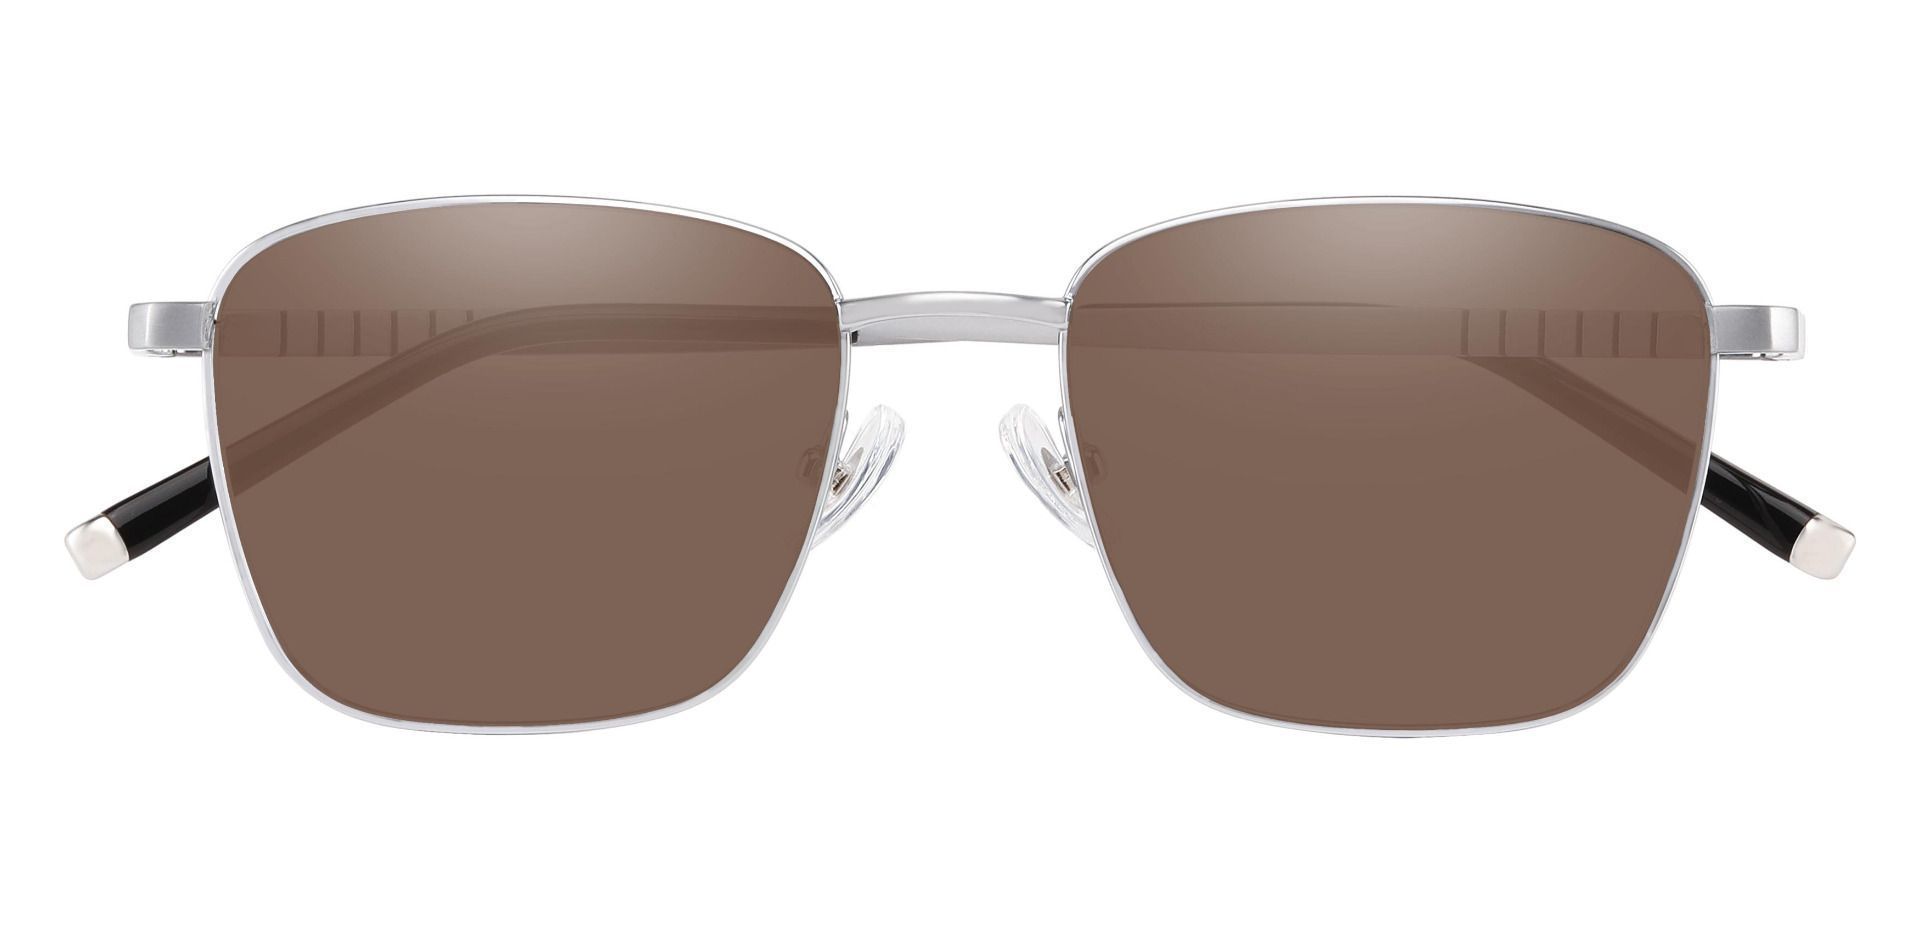 May Square Reading Sunglasses - Silver Frame With Brown Lenses